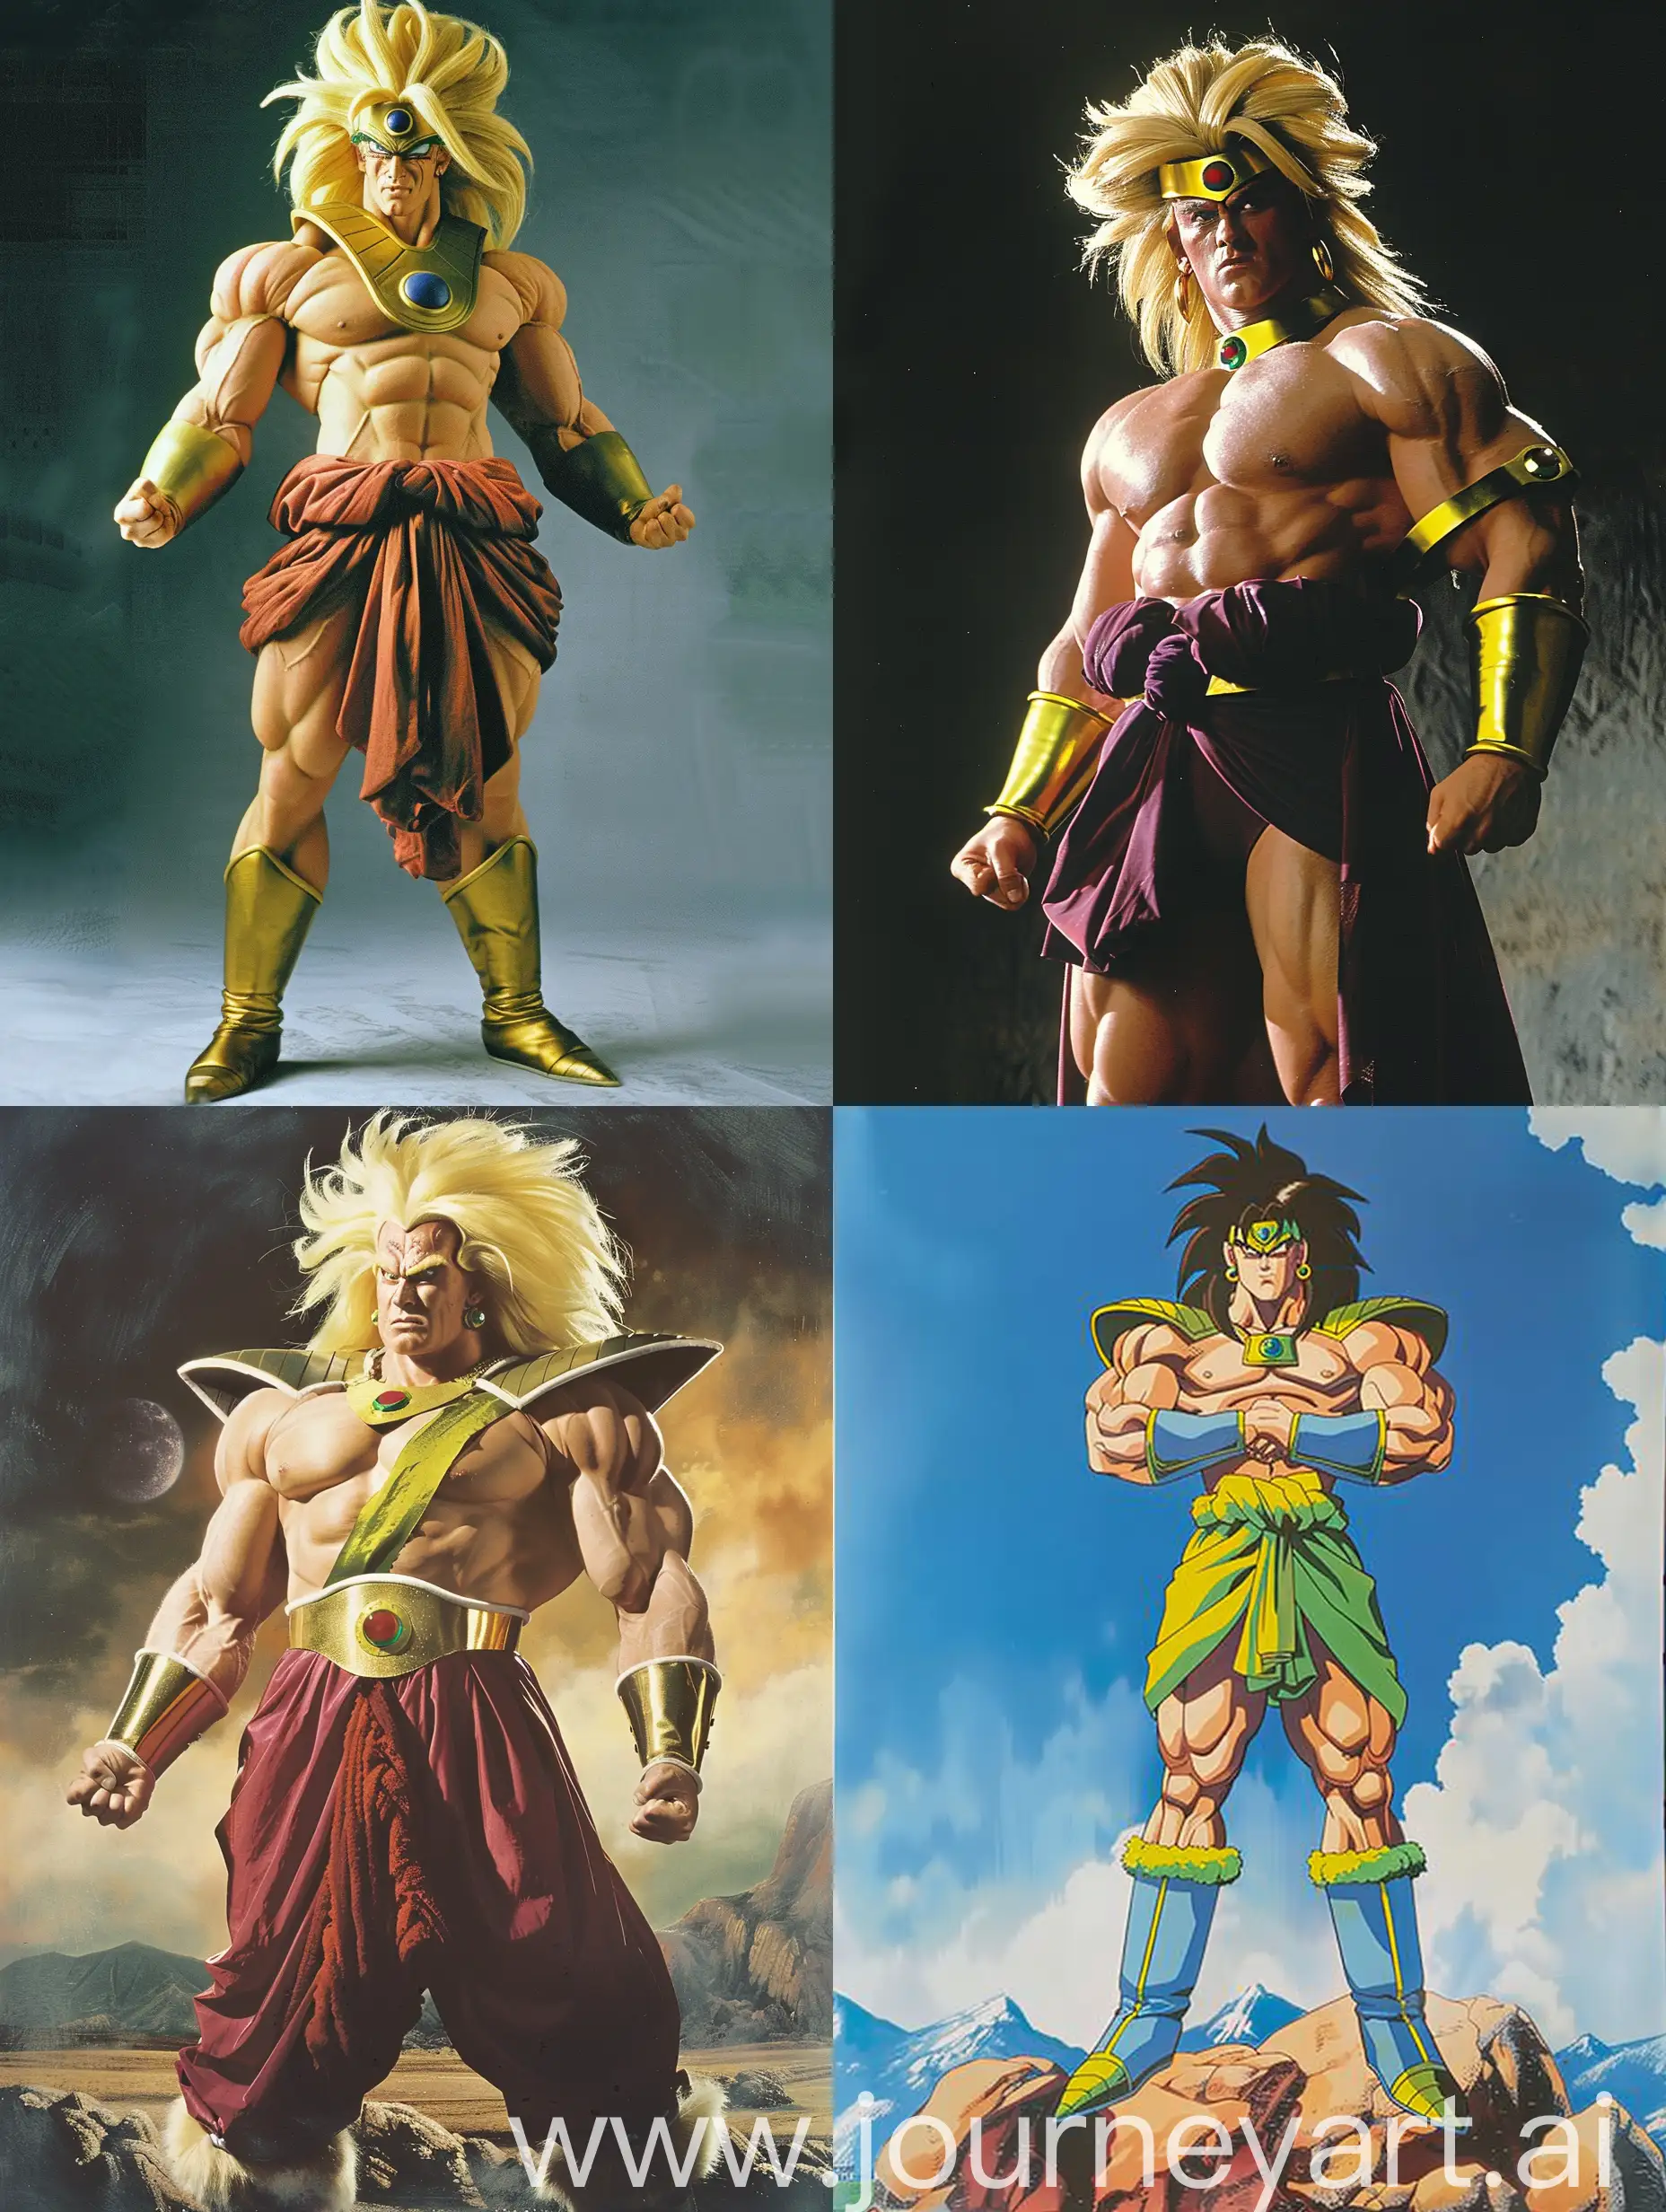 dvd screengrab from 1980s film, Broly from dragon ball in 1980s era wearing 1980s costume, directed by west Anderson